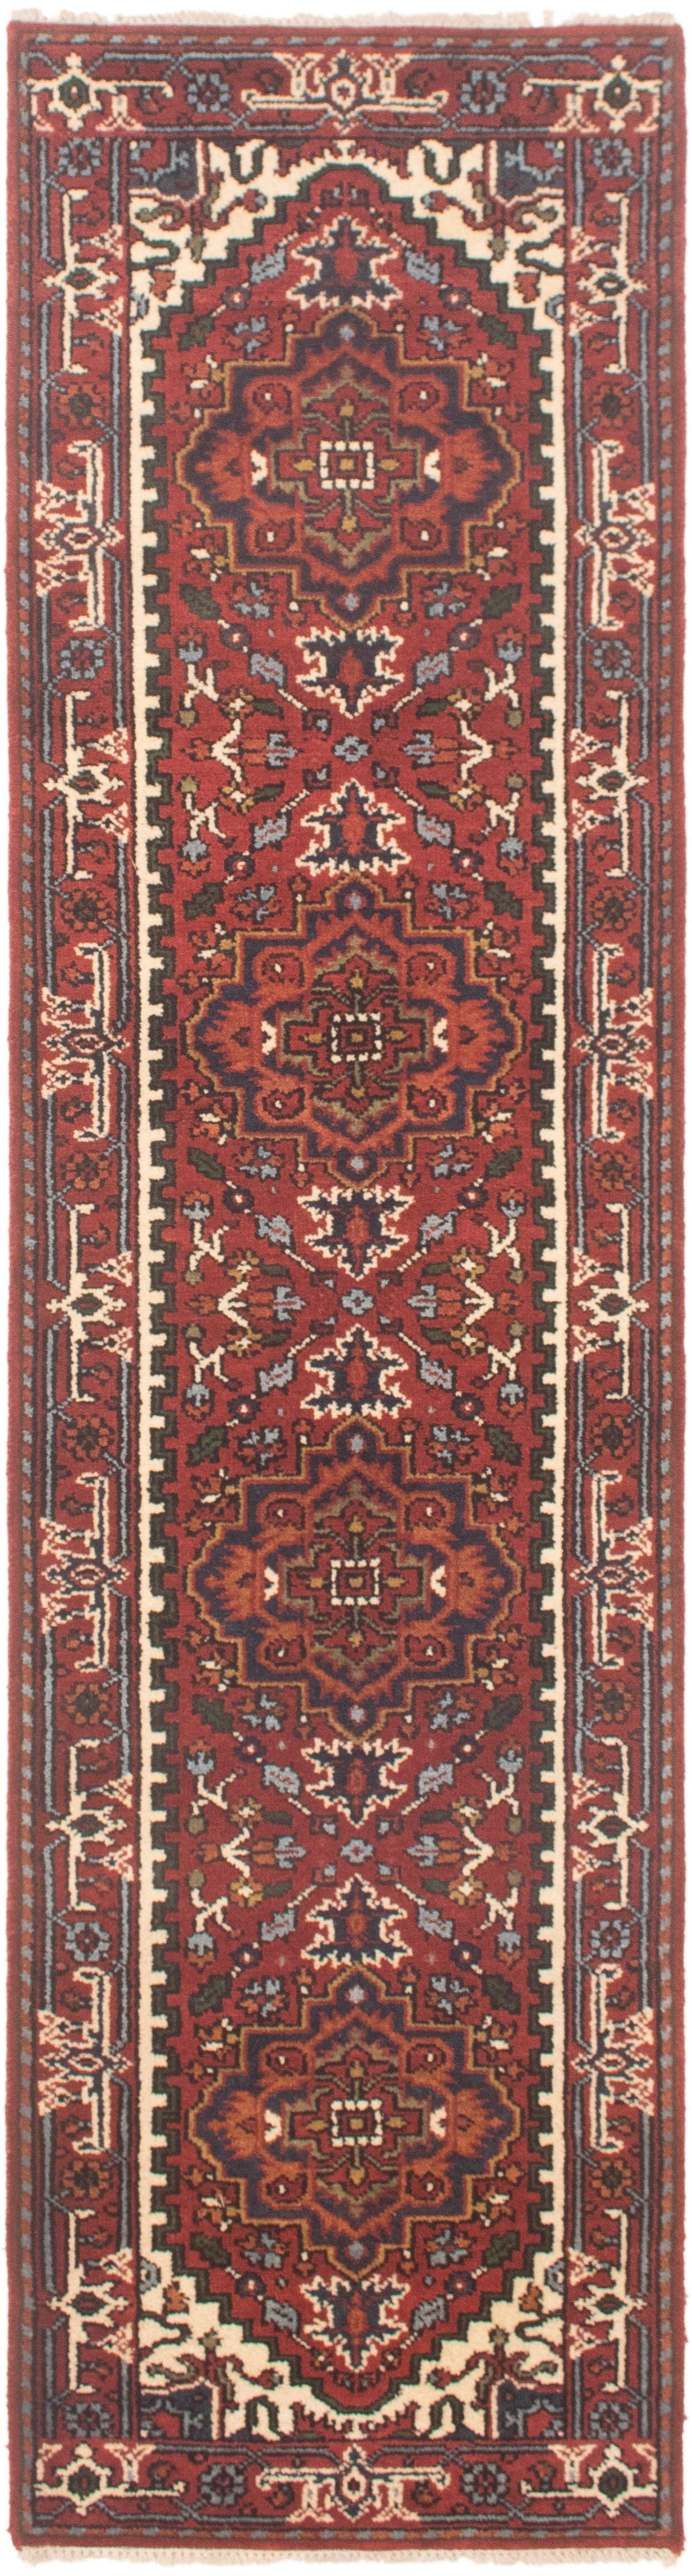 Hand-knotted Serapi Heritage Dark Copper Wool Rug 2'6" x 10'1"  Size: 2'6" x 10'1"  